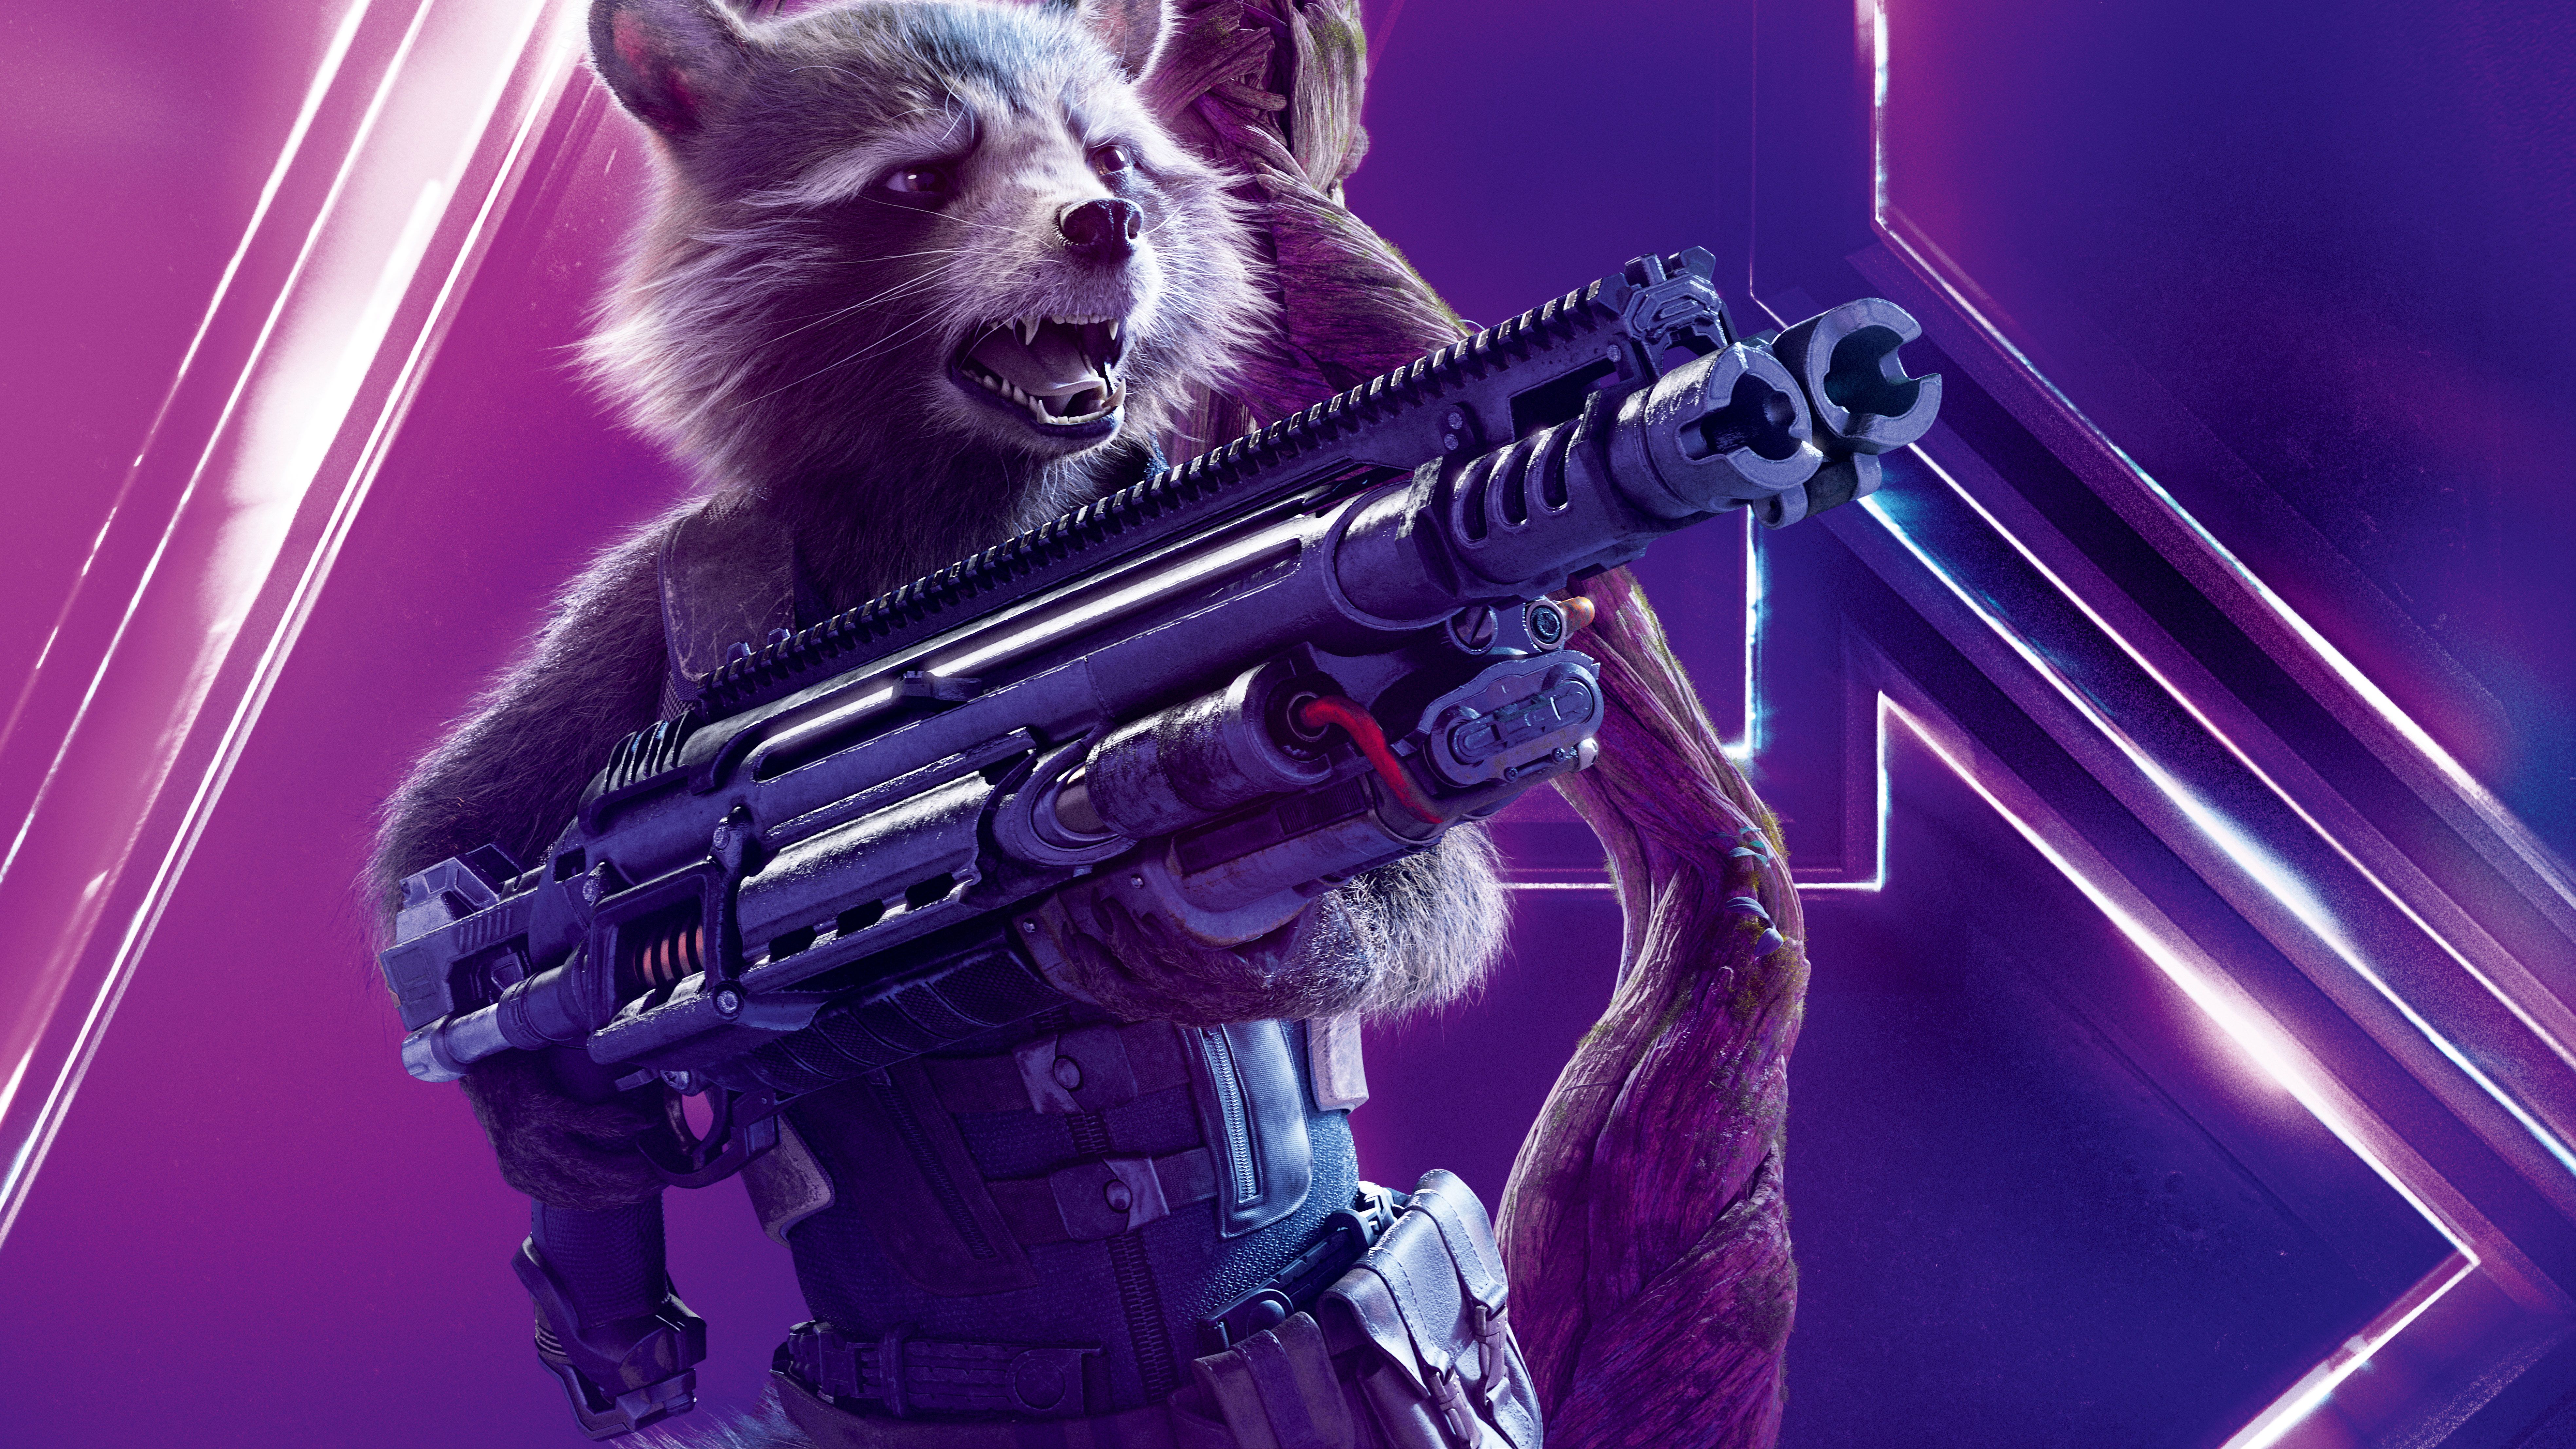 Rocket Raccoon In Avengers Infinity War 8k Poster, HD Movies, 4k Wallpaper, Image, Background, Photo and Picture